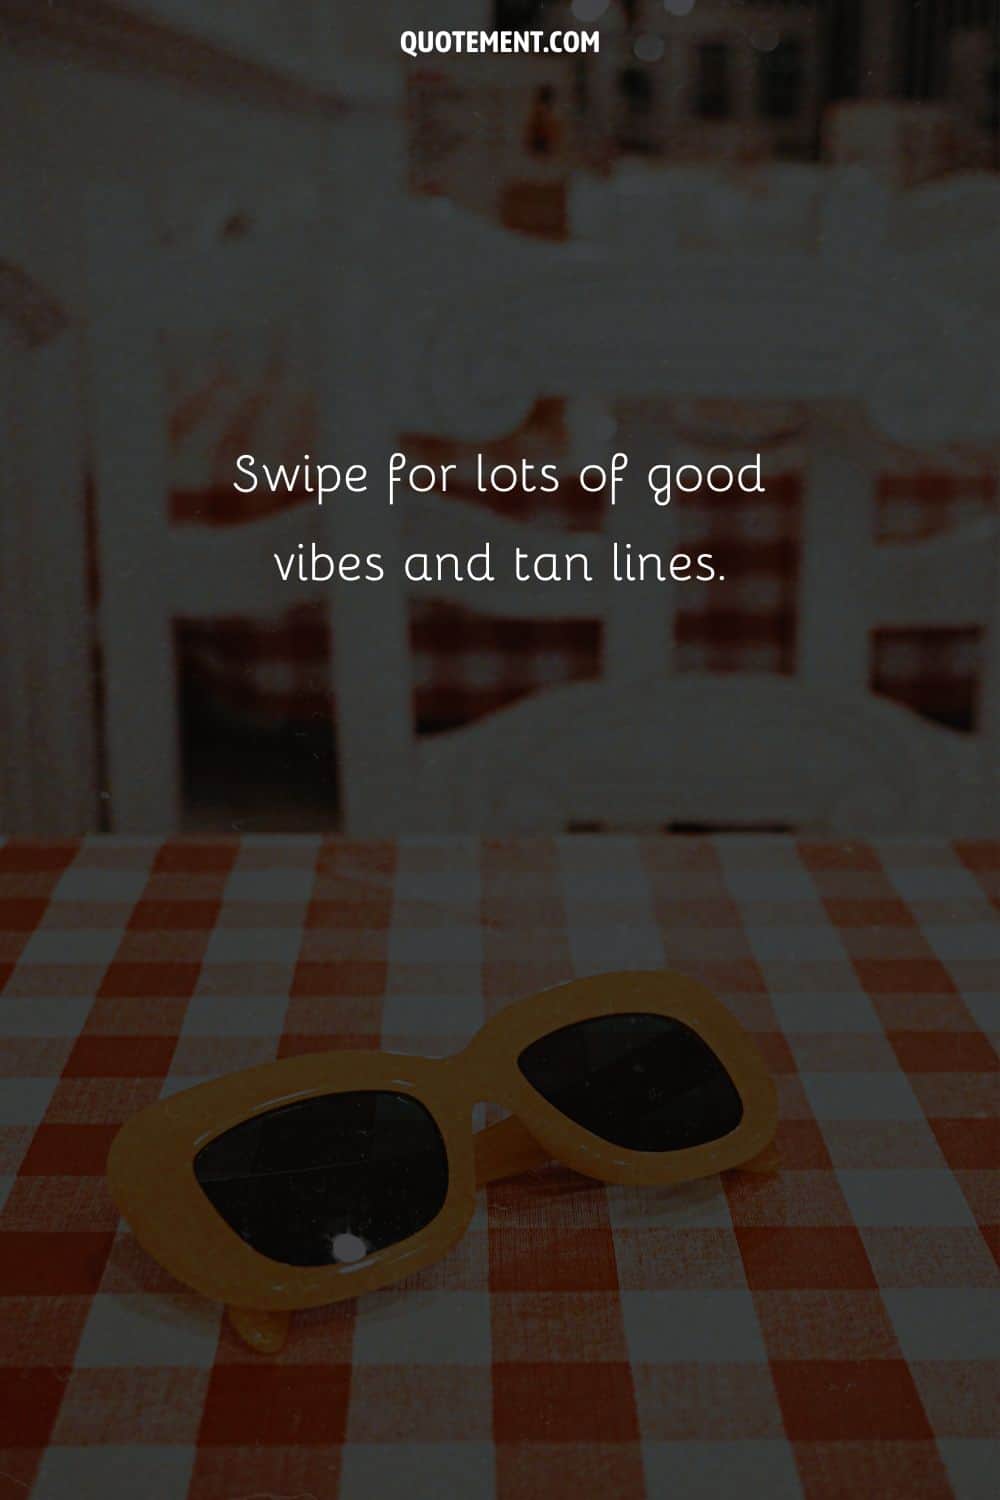 Swipe for lots of good vibes and tan lines.
